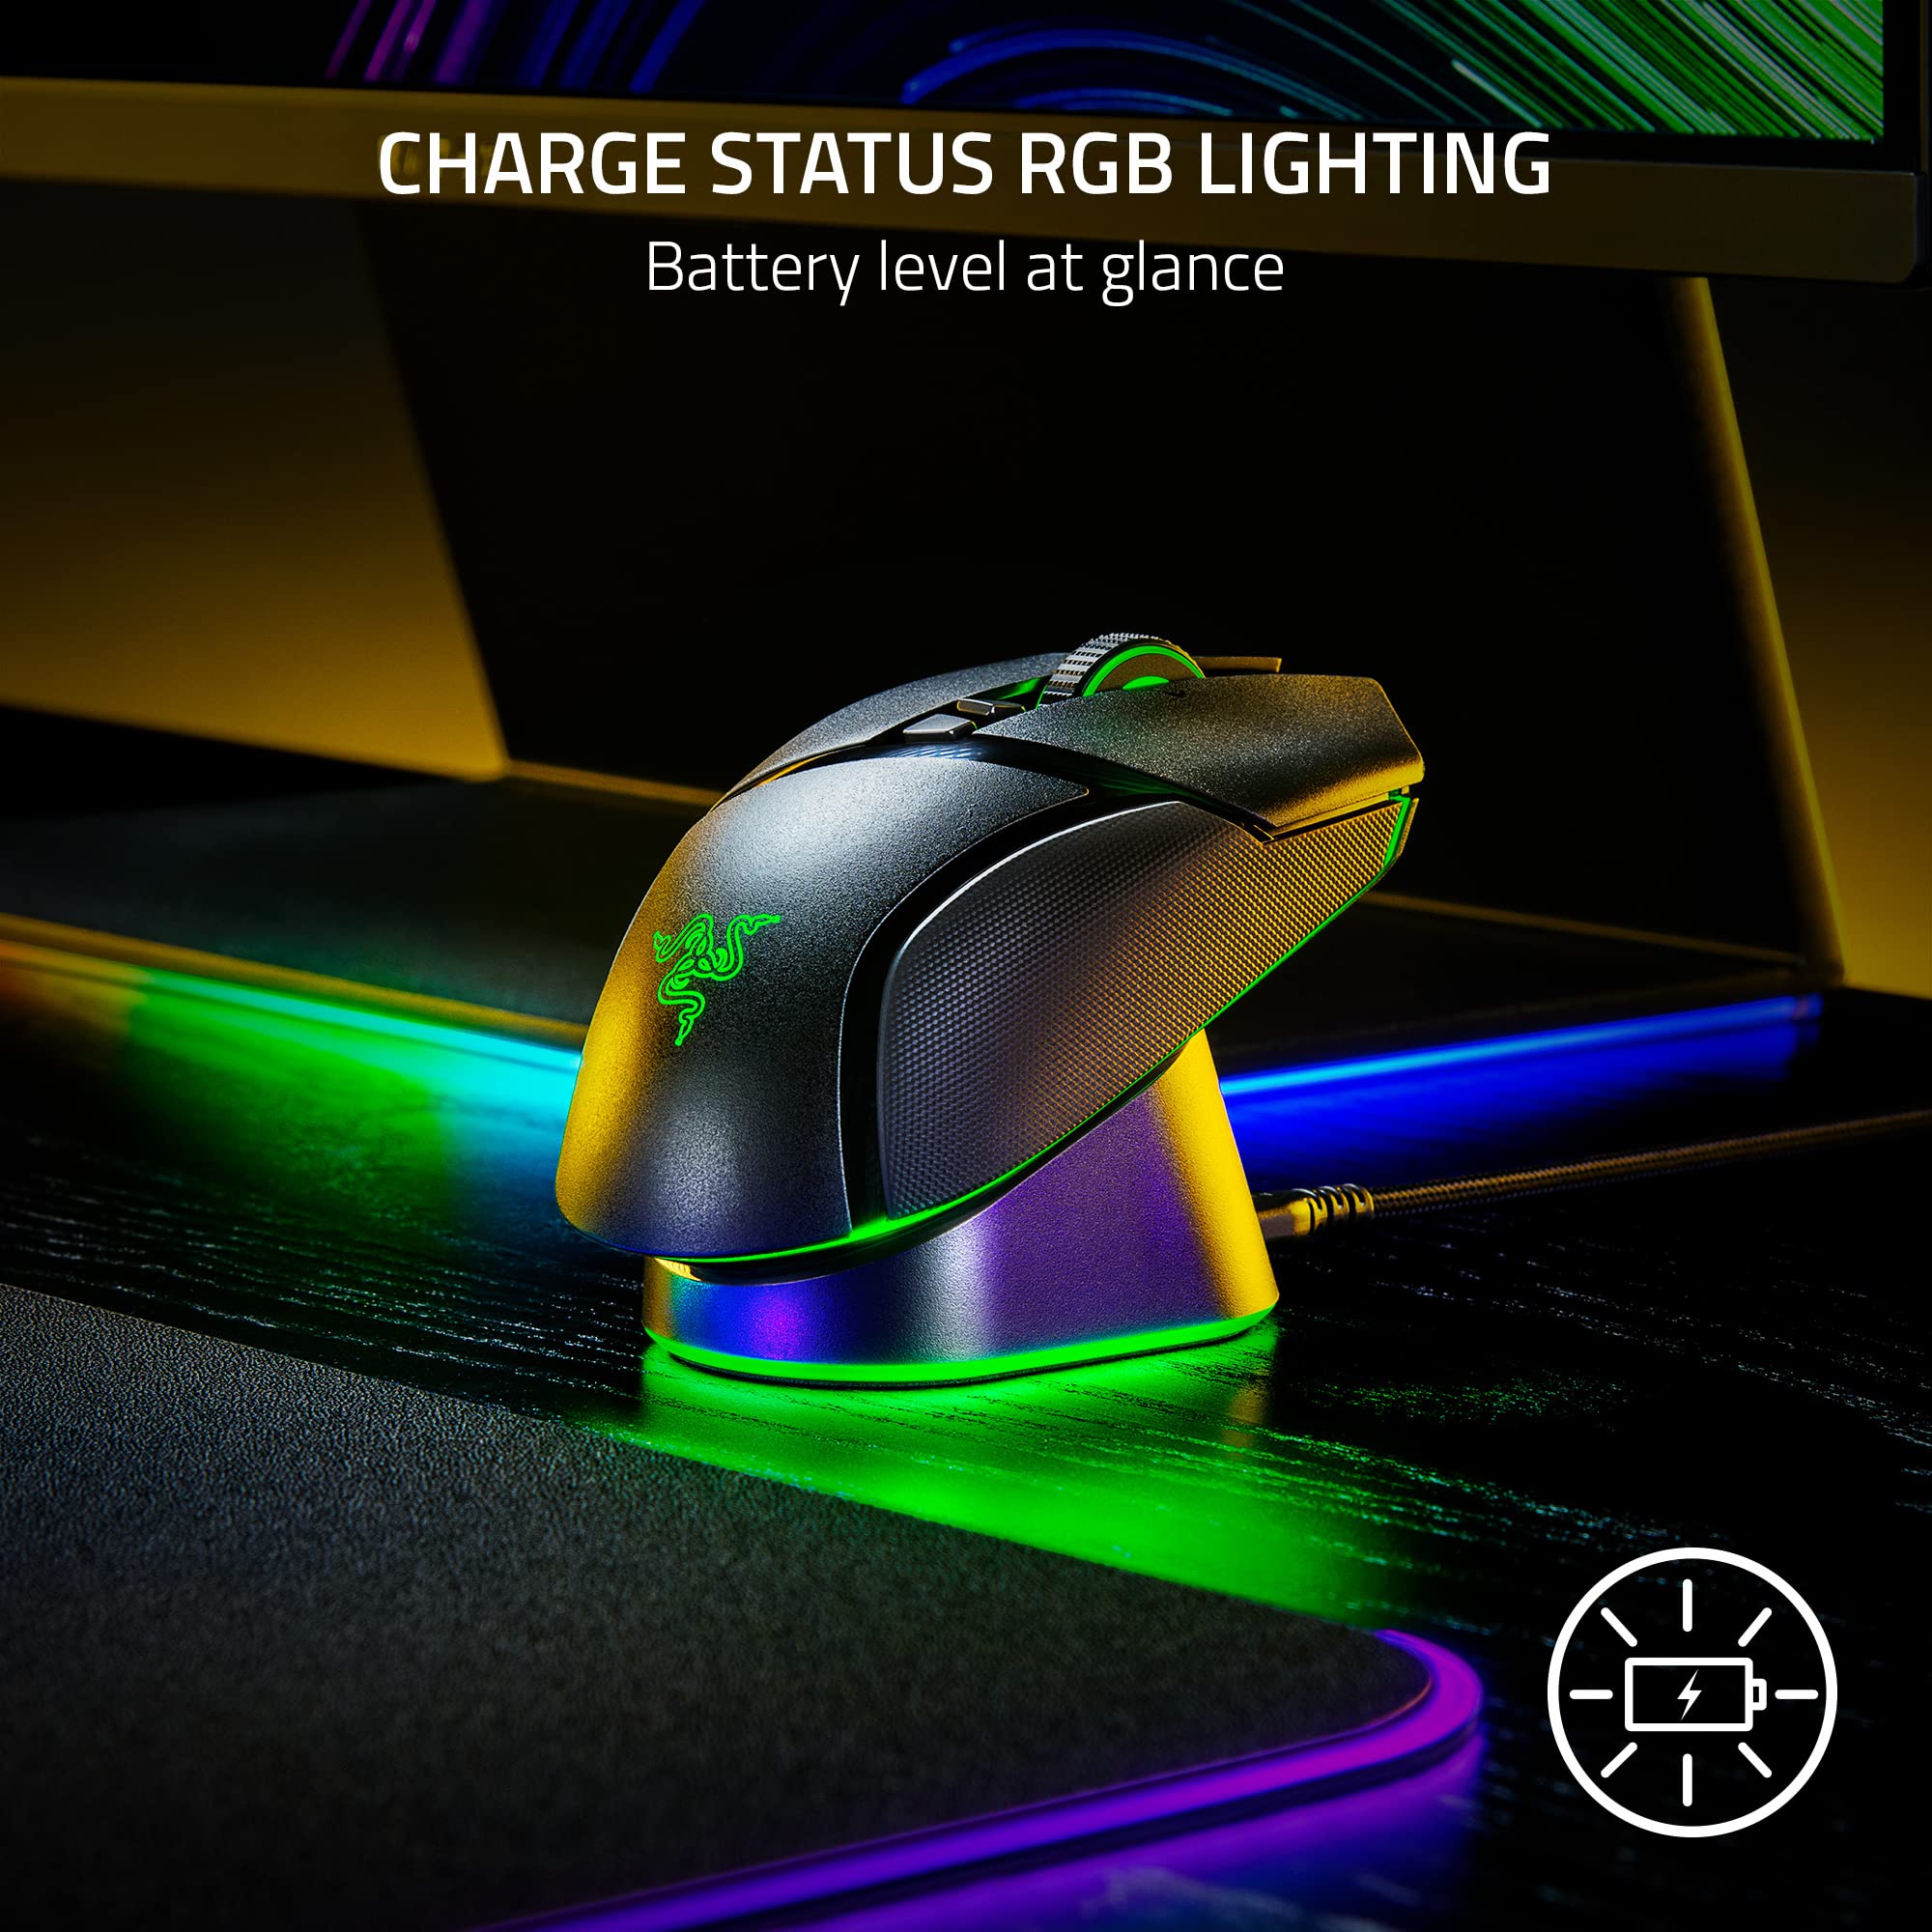 Razer Mouse Dock Pro with Wireless Charging Puck: Magnetic Wireless Charging - Integrated HyperPolling 8K Hz Transceiver - Anti-Slip Base - Chroma RGB Lighting - Classic Black